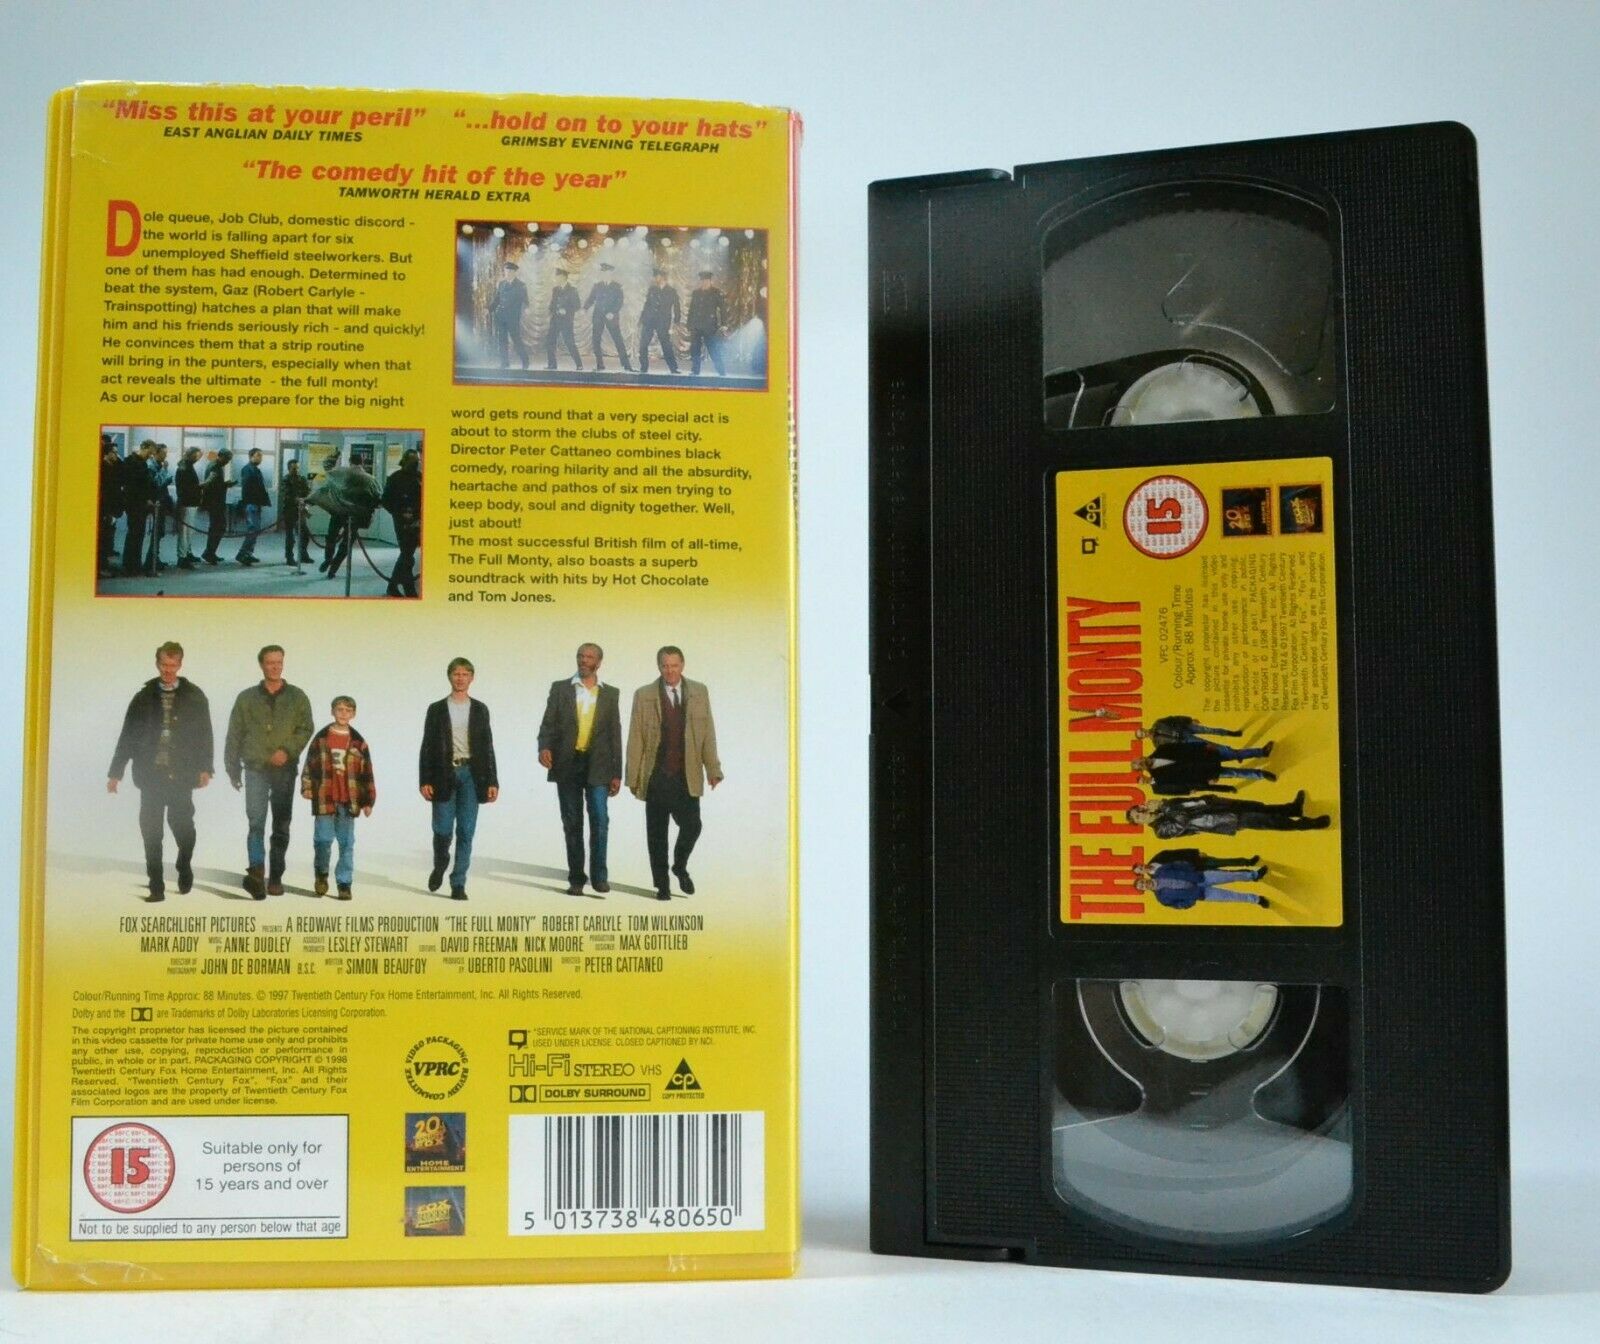 The Full Monty (1997): Britain's Favourite Comedy - Male Striptease Act - VHS-